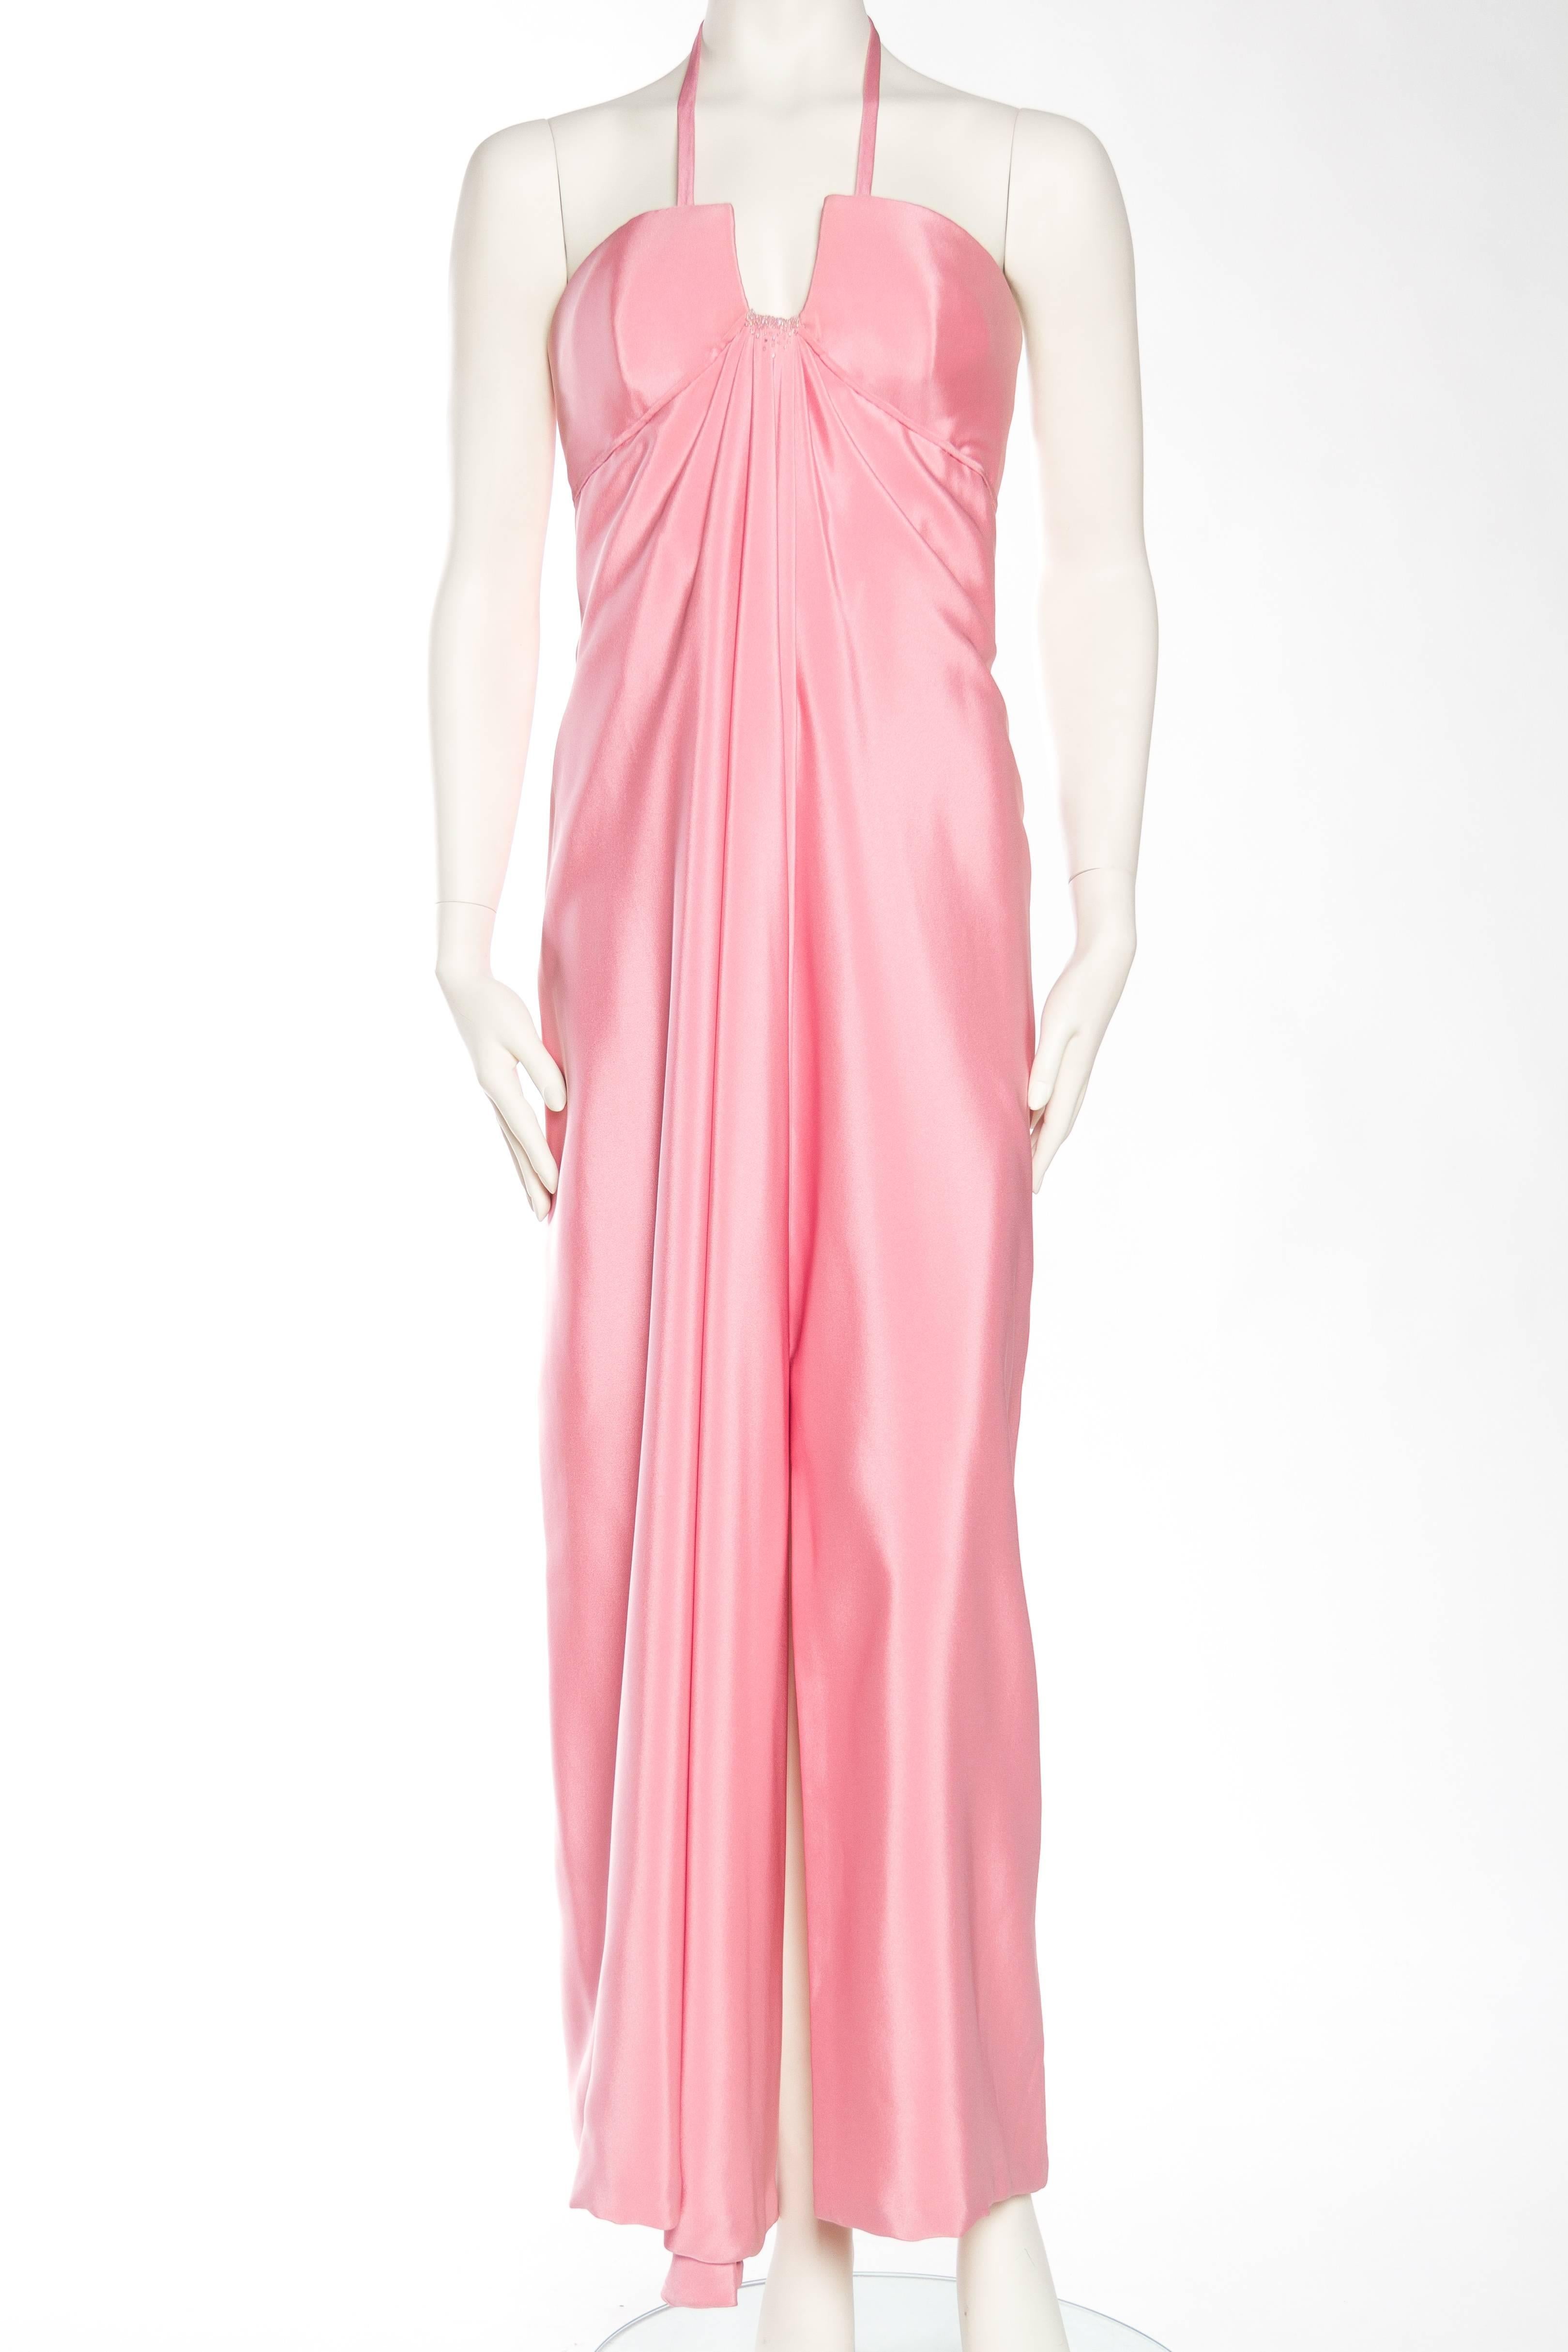 1970S  VALENTINO Style Baby Pink Haute Couture Silk Crepe Boned Empire Waist Gown